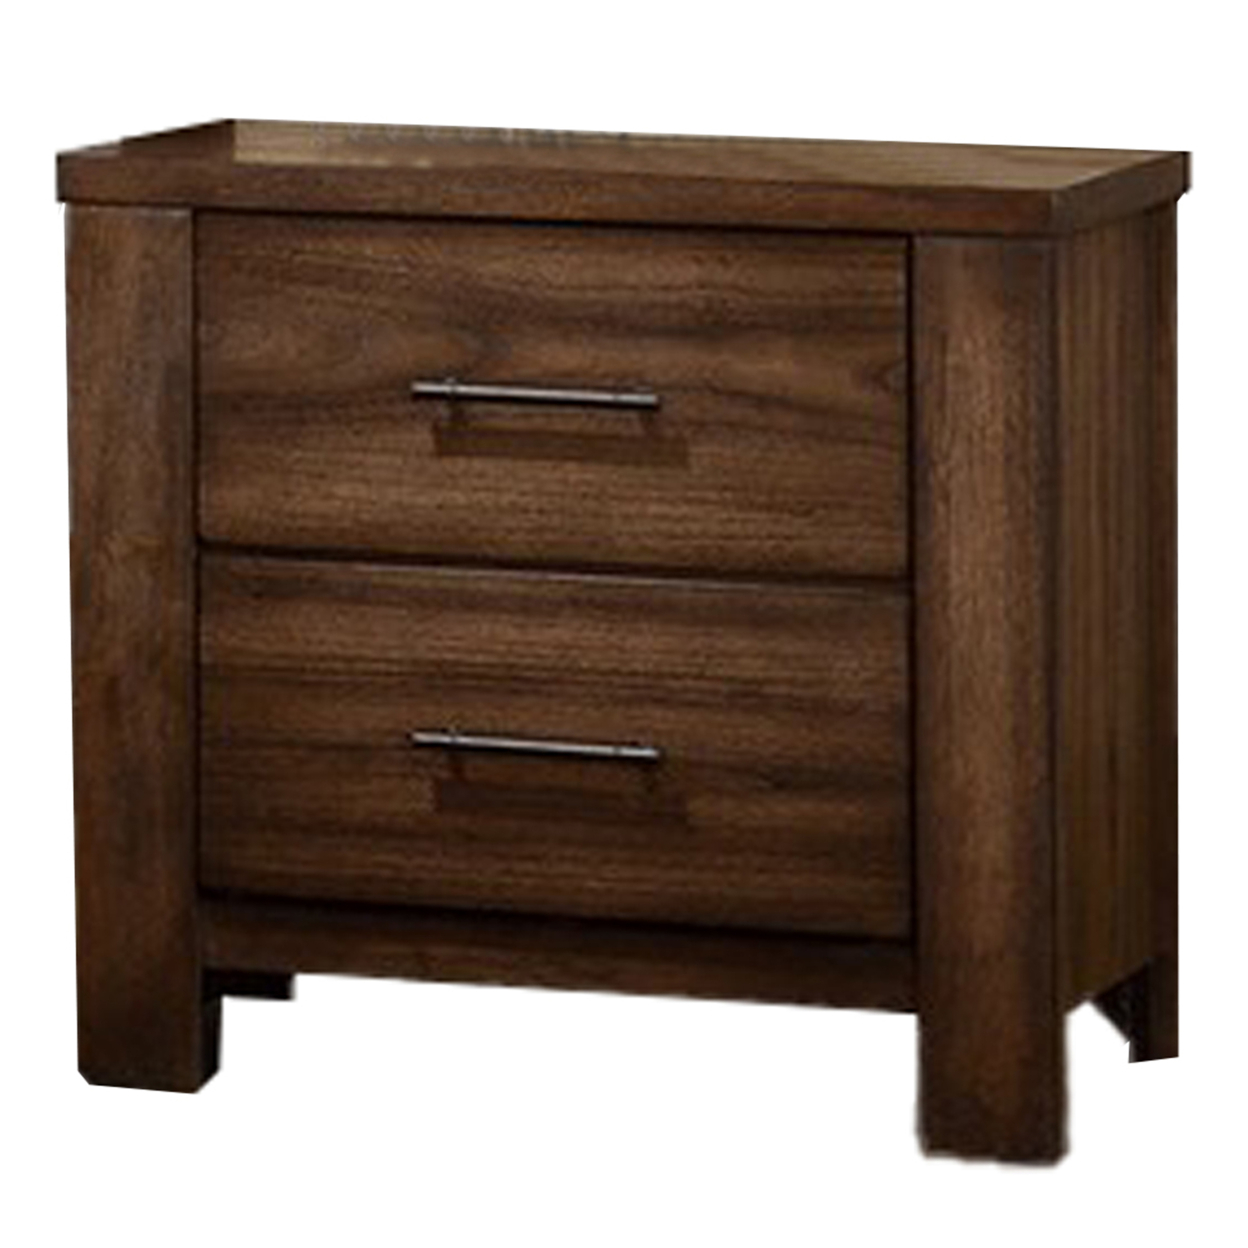 Transitional Wooden Nightstand With Two Drawers, Brown- Saltoro Sherpi